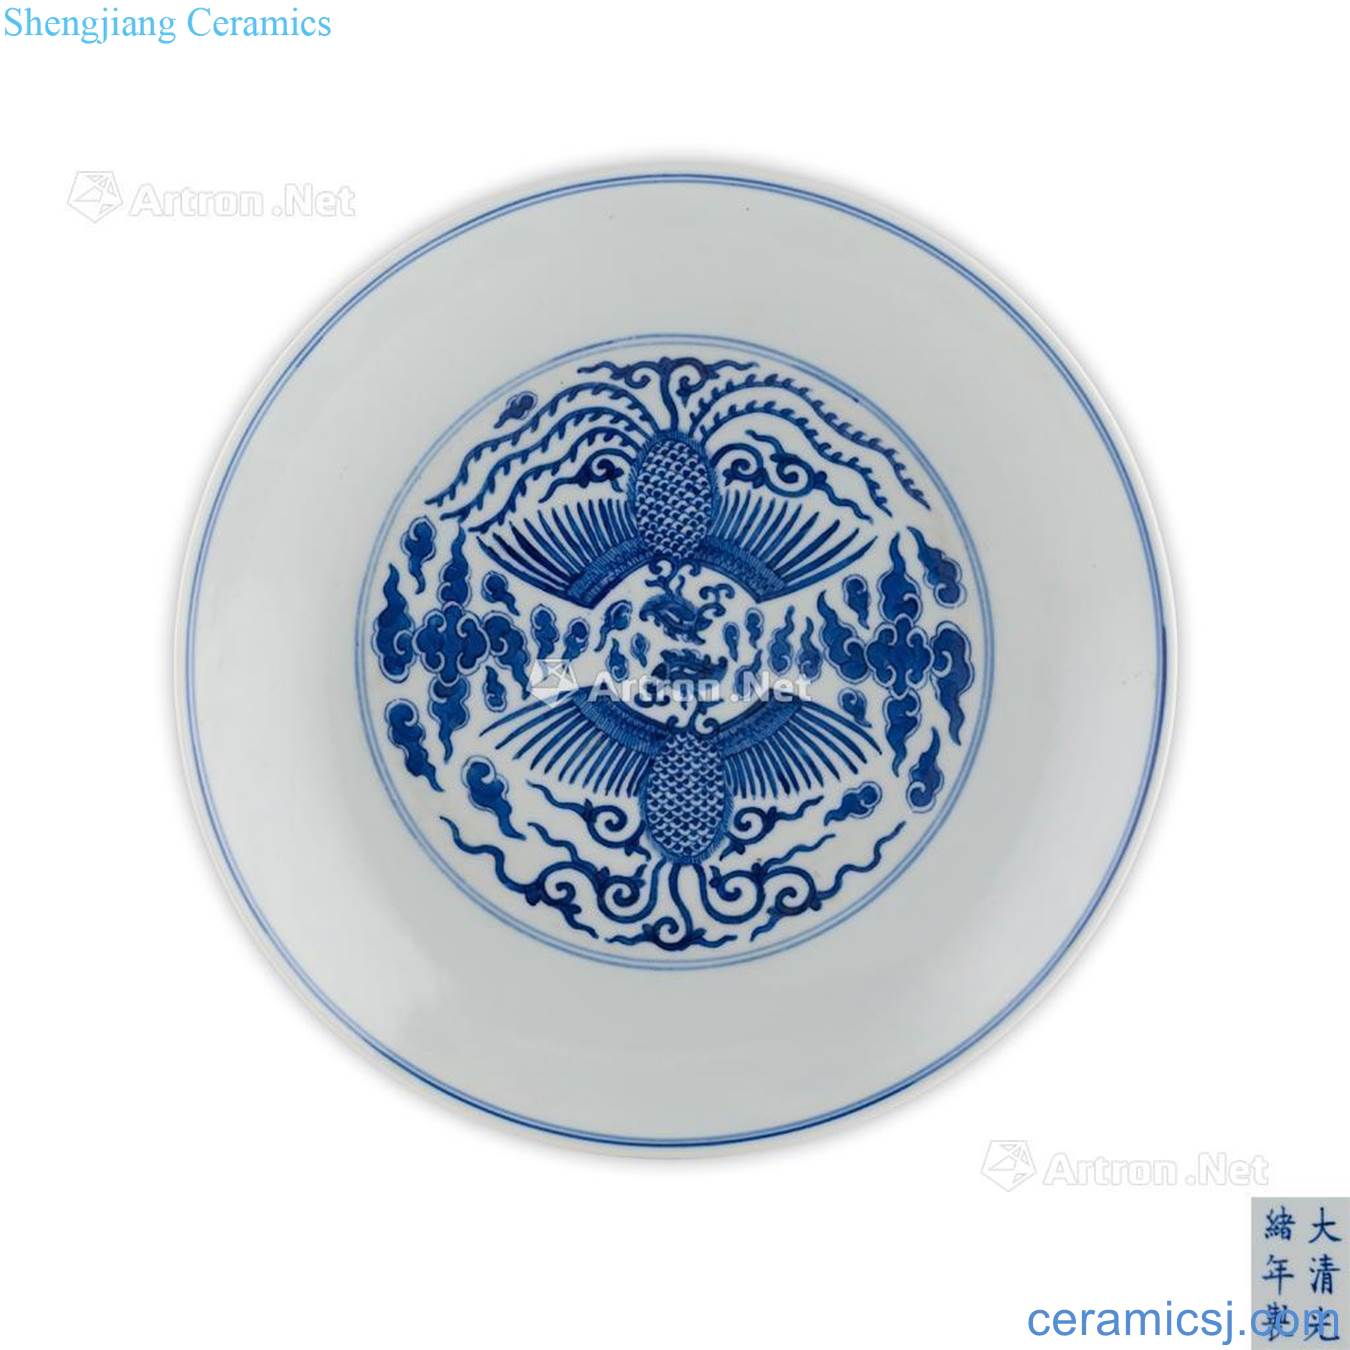 GUANGXU MARK THE AND OF THE PERIOD BLUE AND WHITE "PHOENIX" DISH